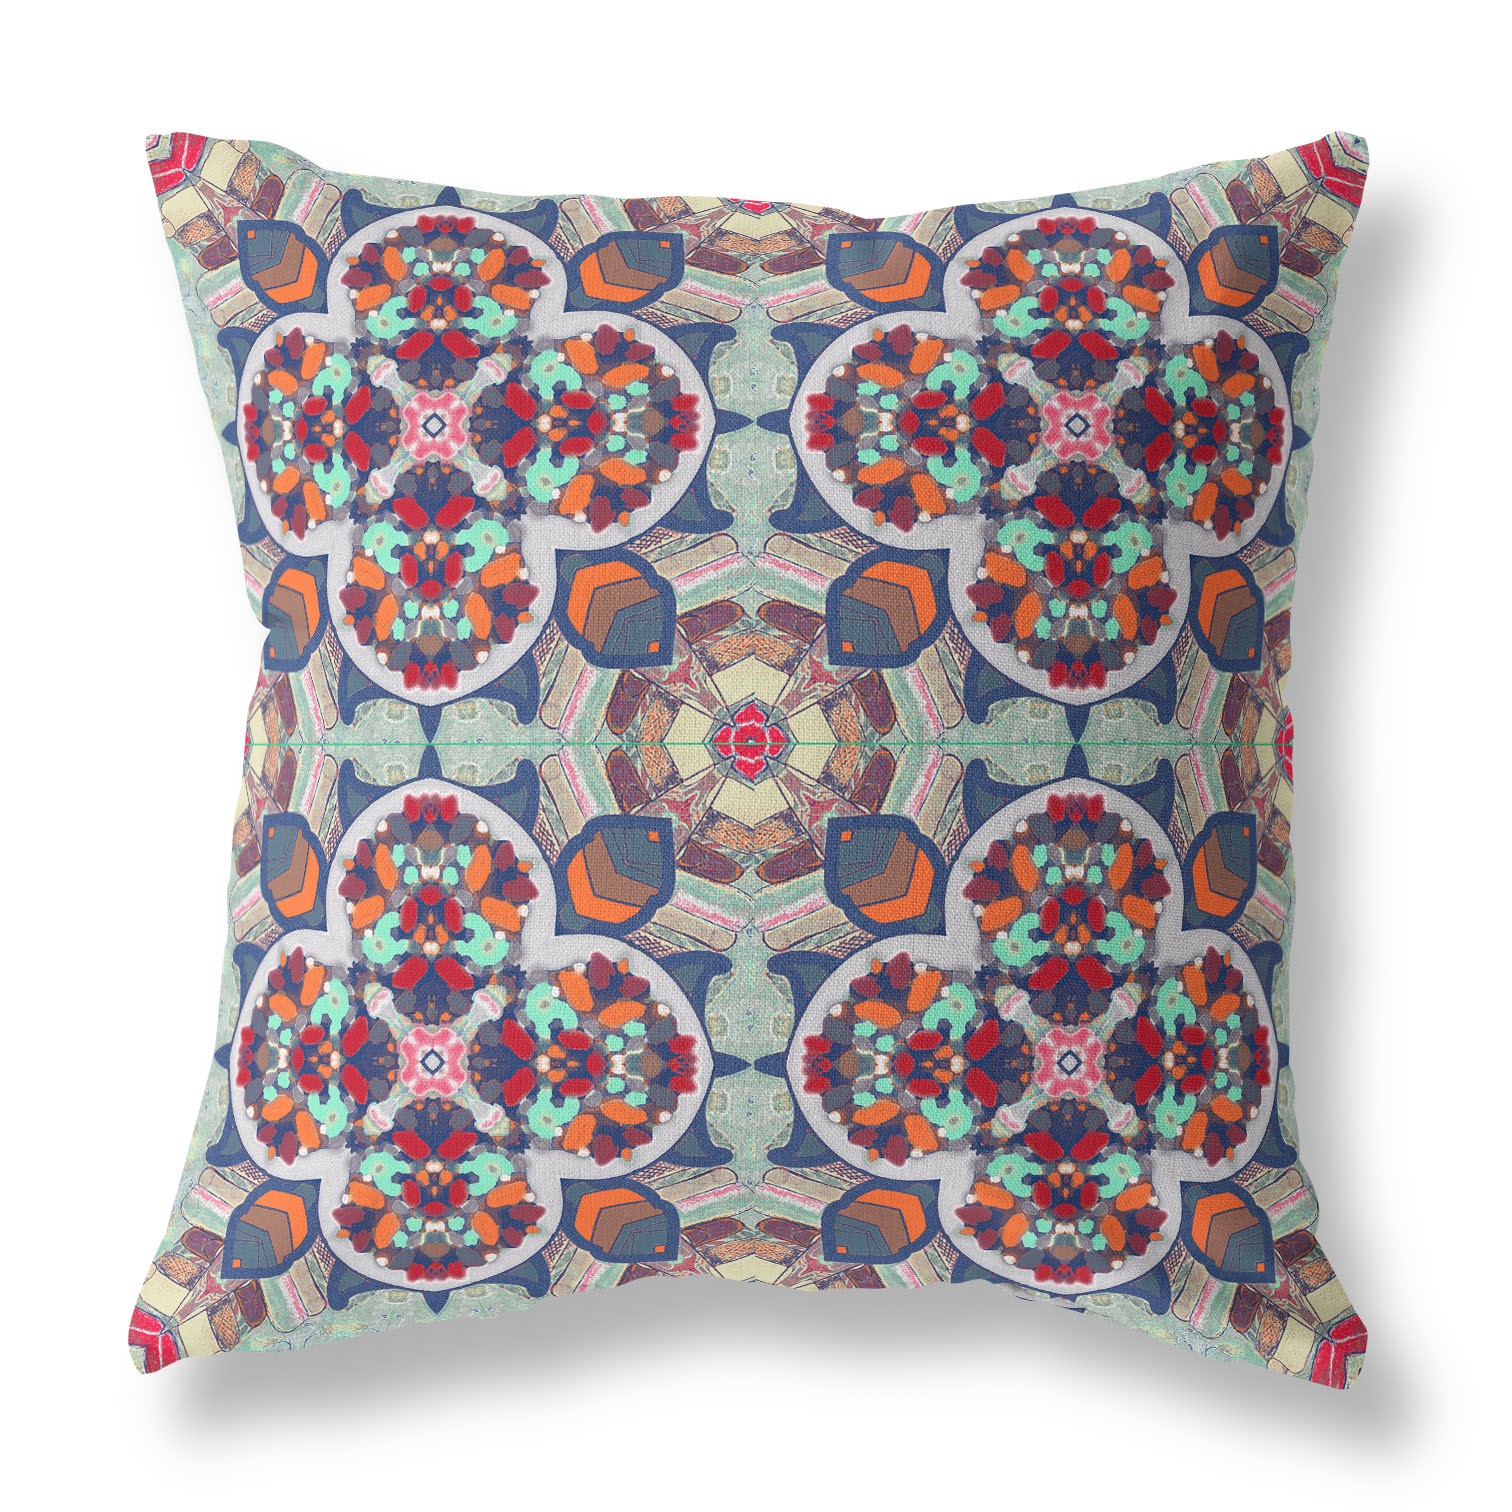 26" X 26" Blue And Orange Zippered Geometric Indoor Outdoor Throw Pillow Cover & Insert-417719-1